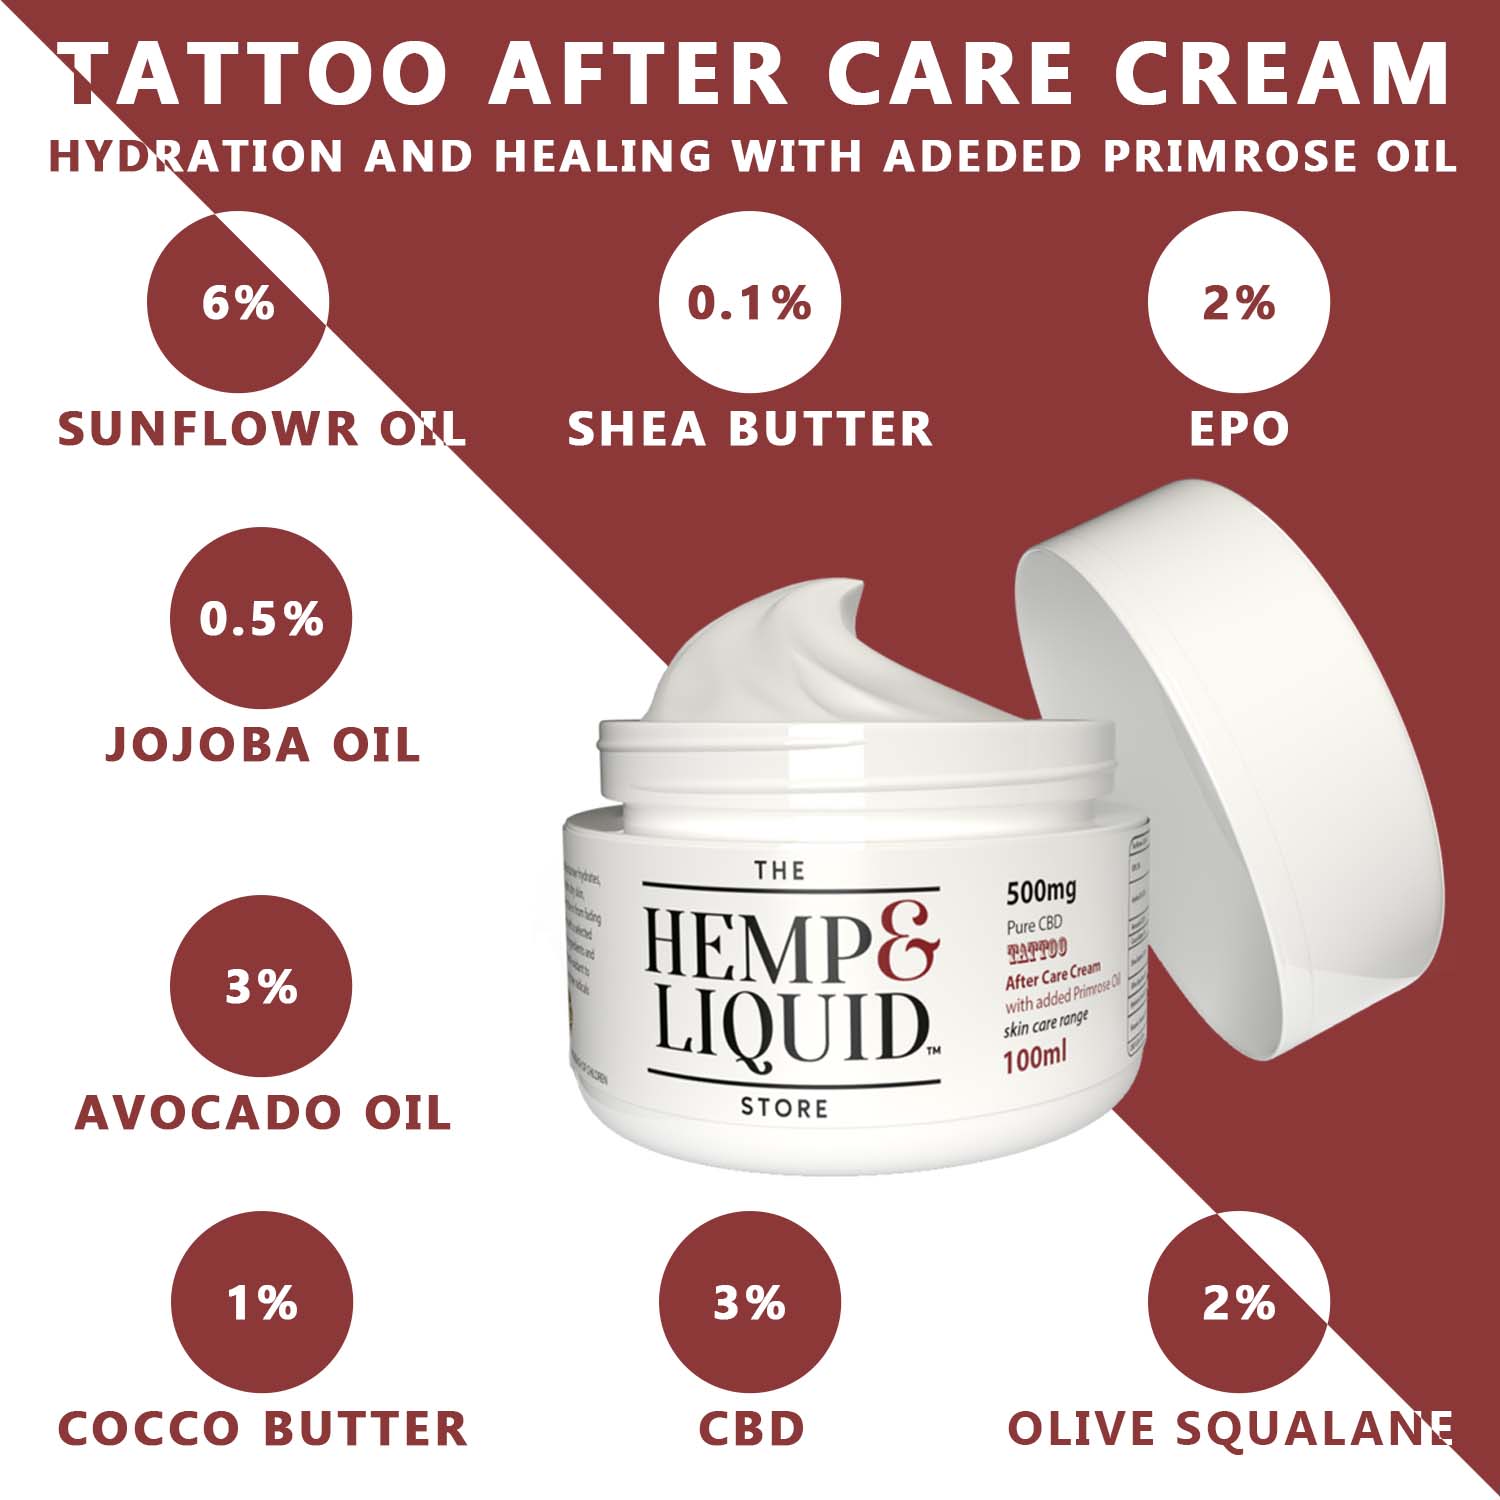 Tattoo After Care Cream Infographic